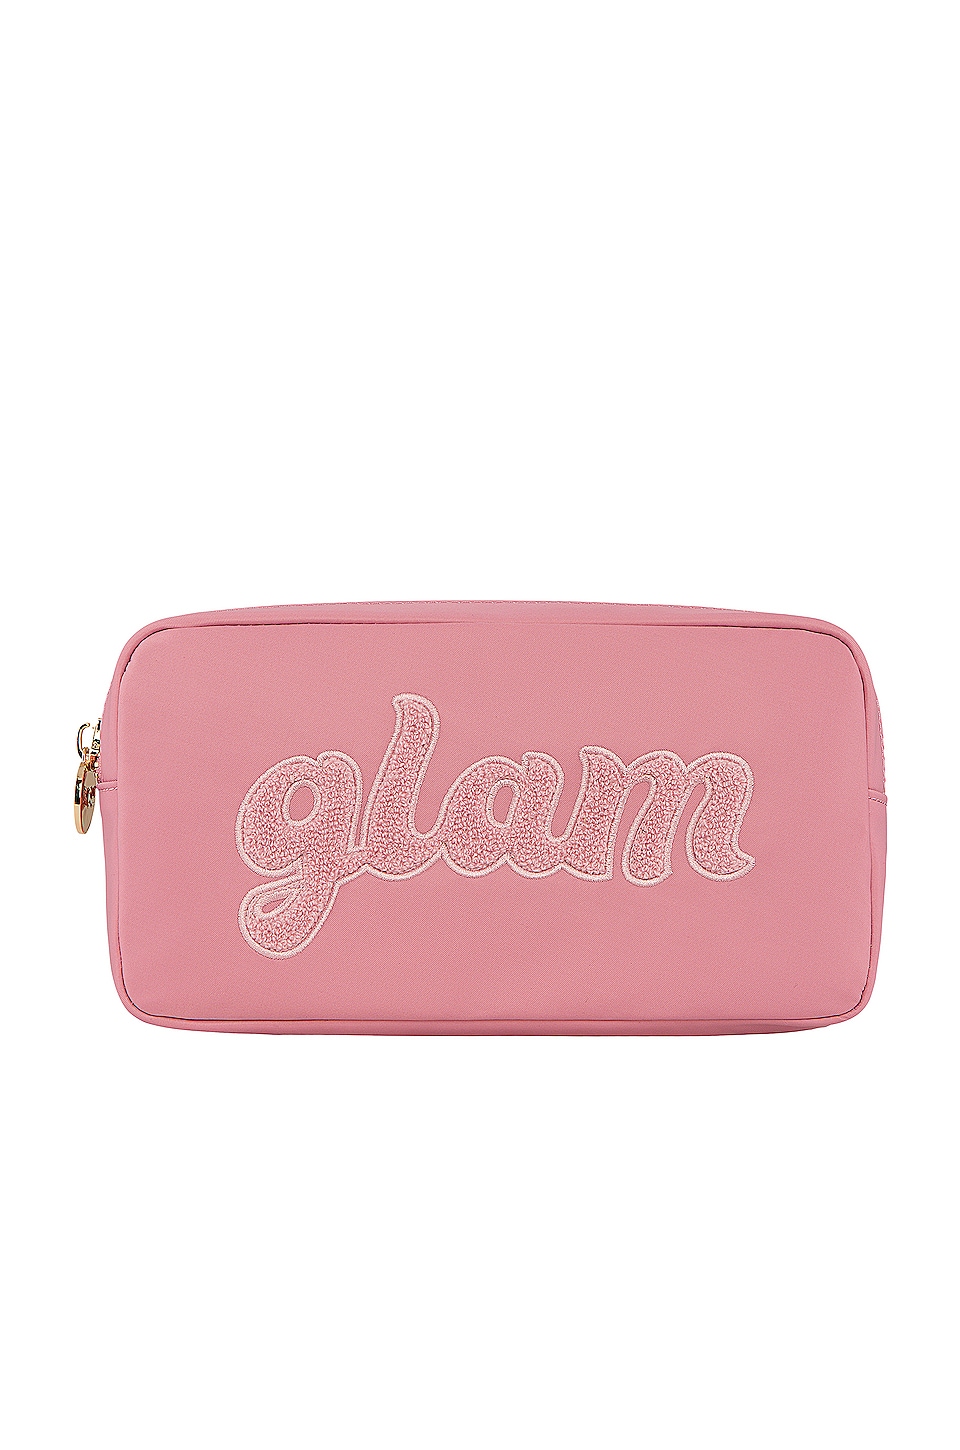 Image 1 of Glam Small Pouch in Mauve